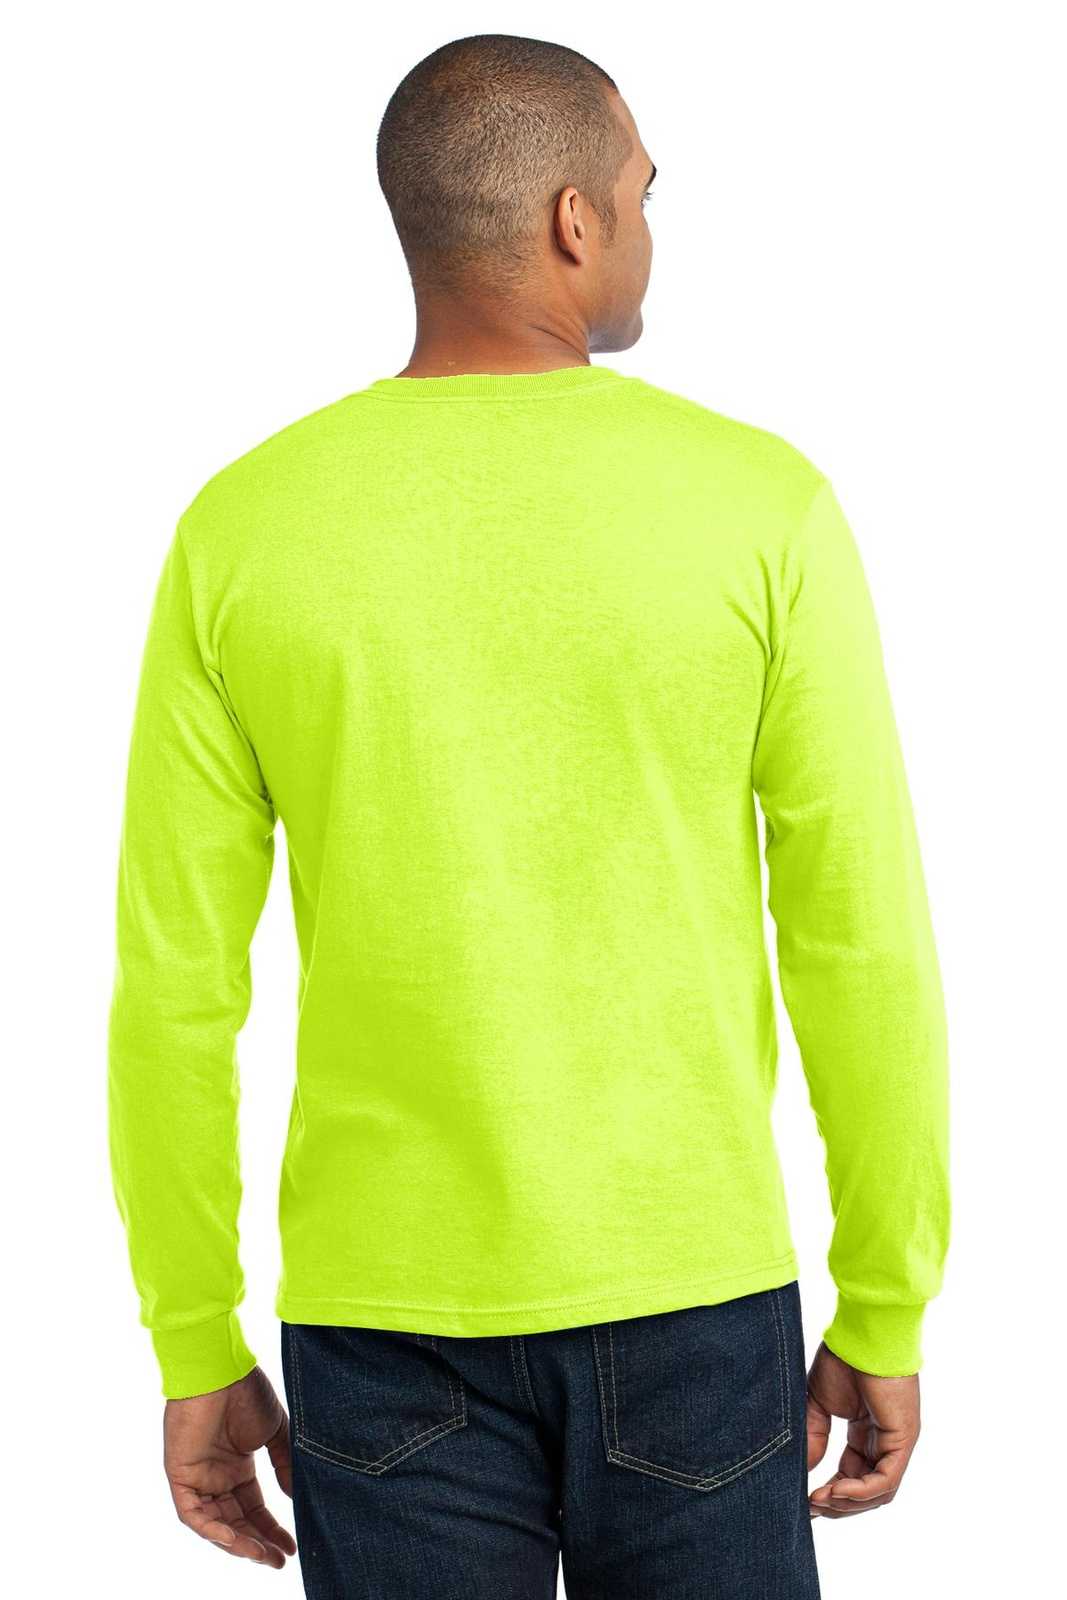 Port & Company USA100LS Long Sleeve All-American Tee - Safety Green - HIT a Double - 1